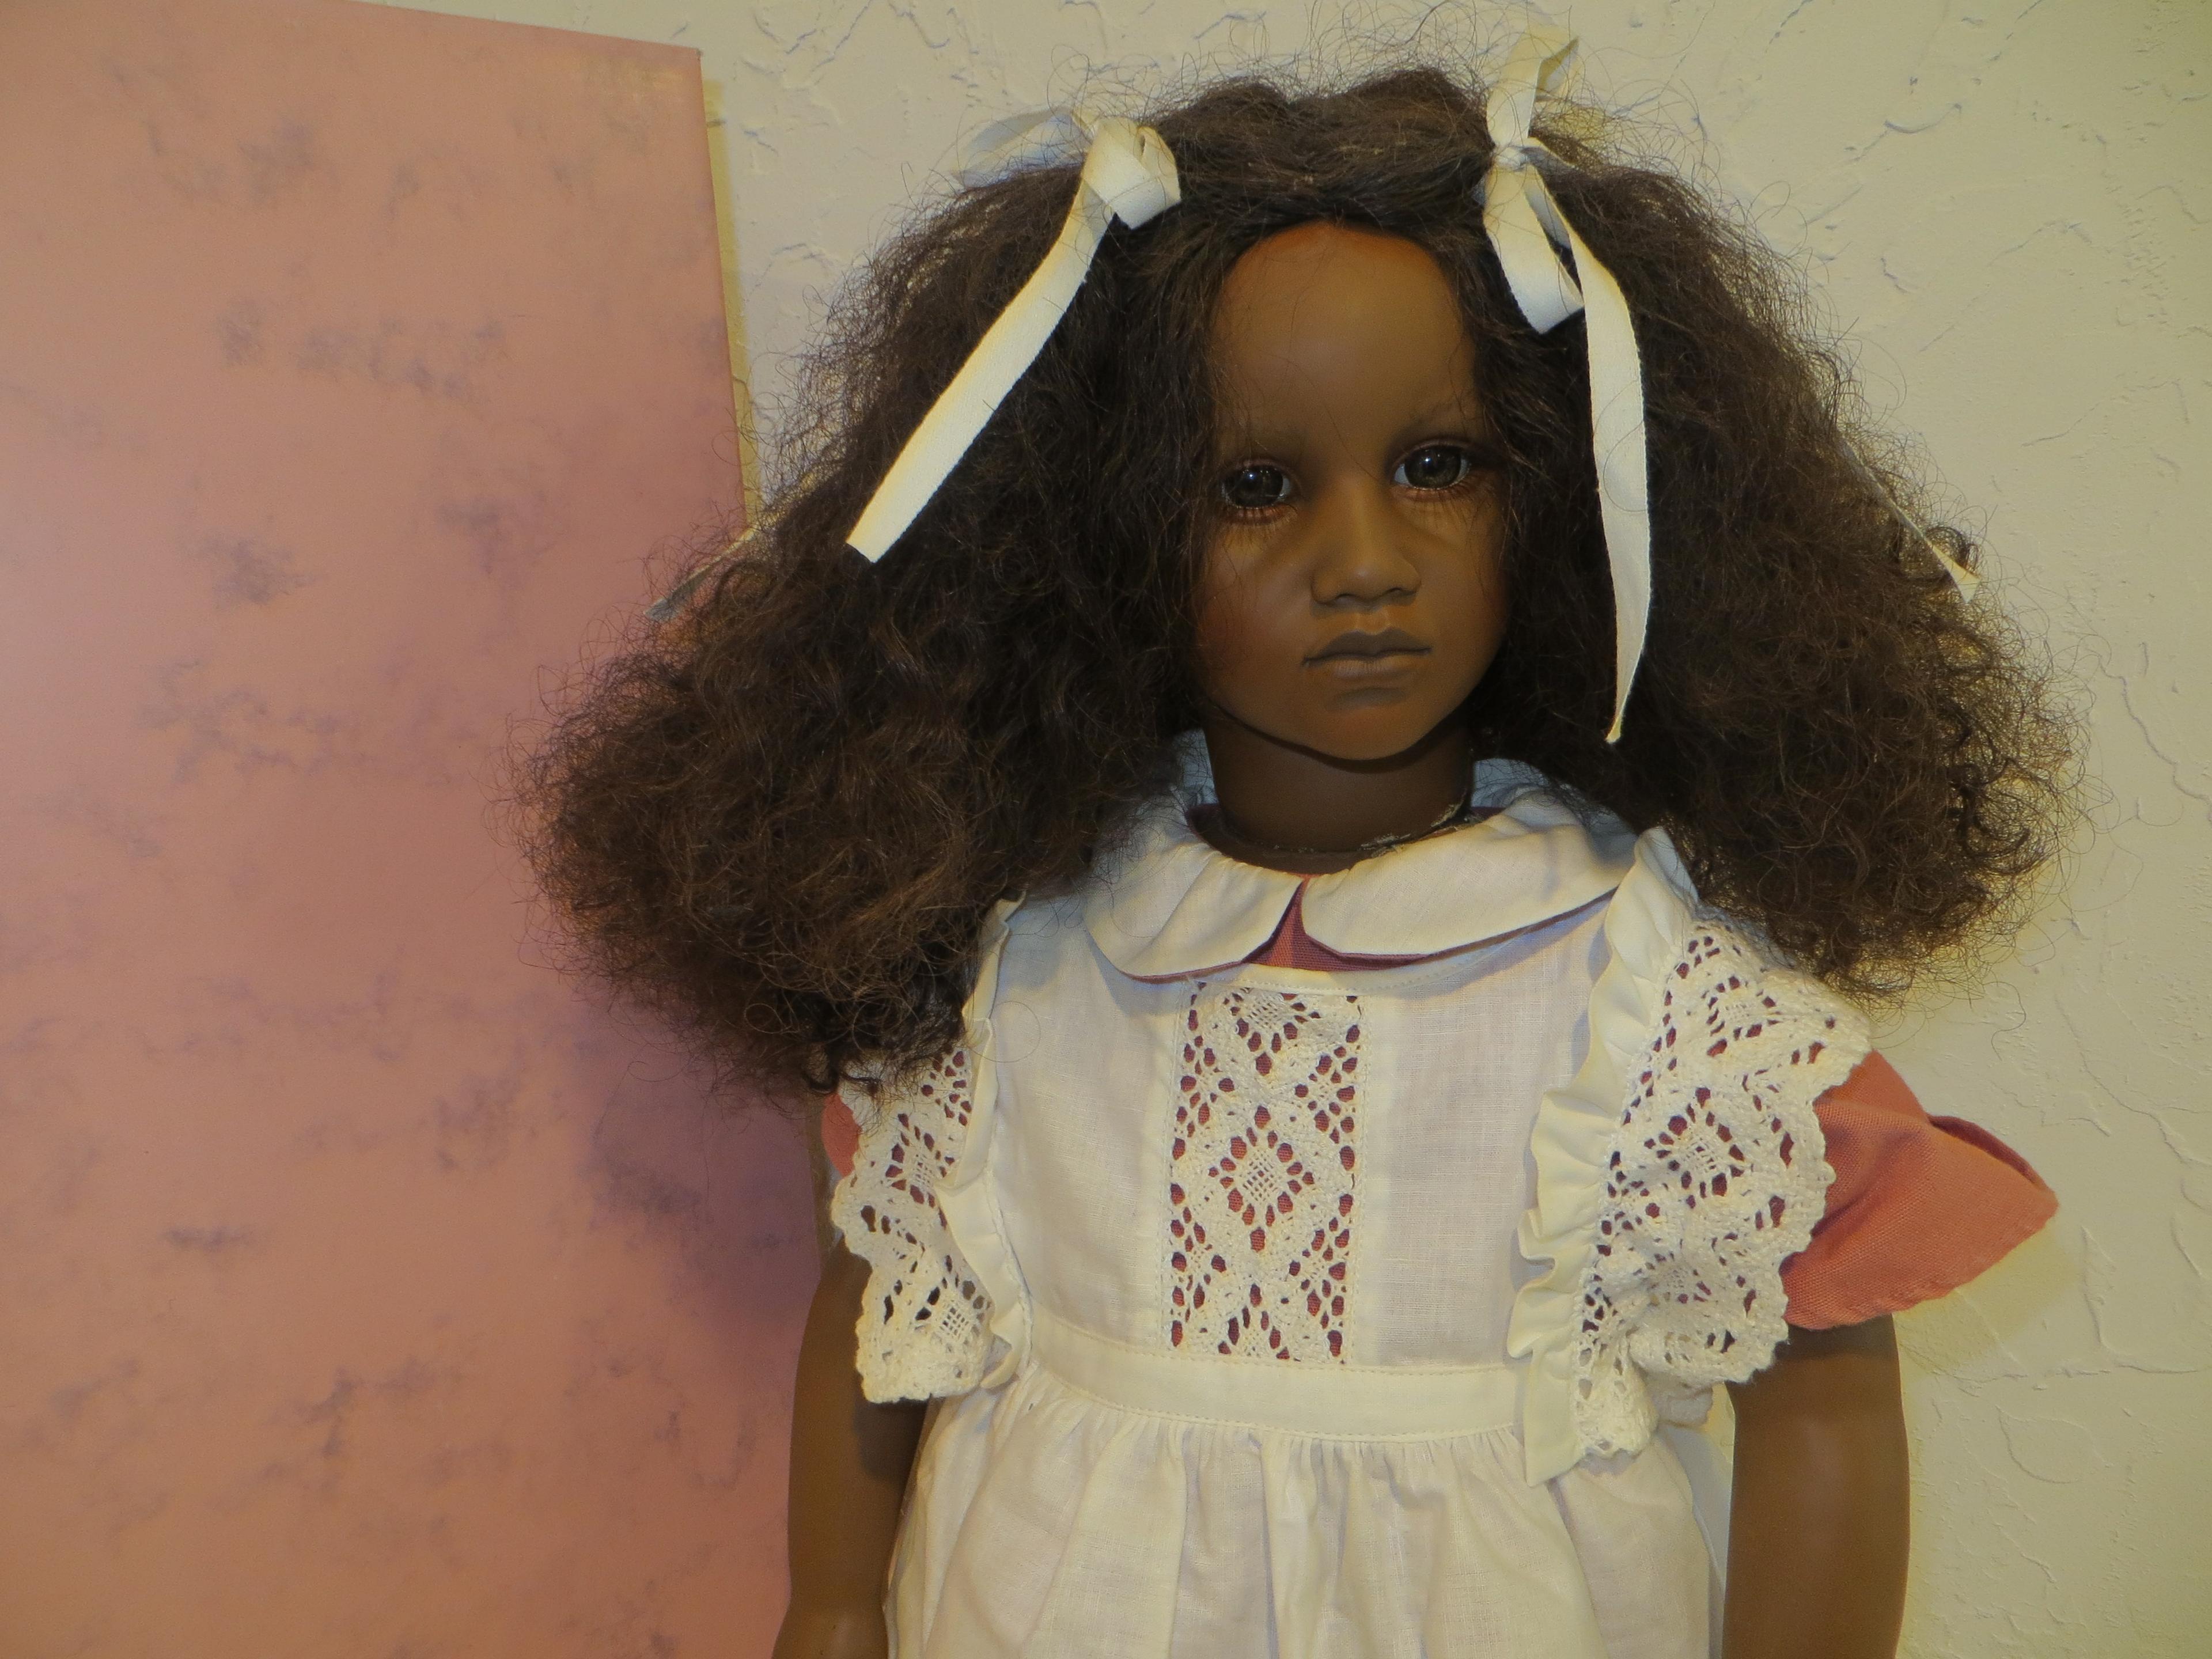 Mattel The Barefoot Children Series 3809 Annette Himstedt Fatou Doll - with